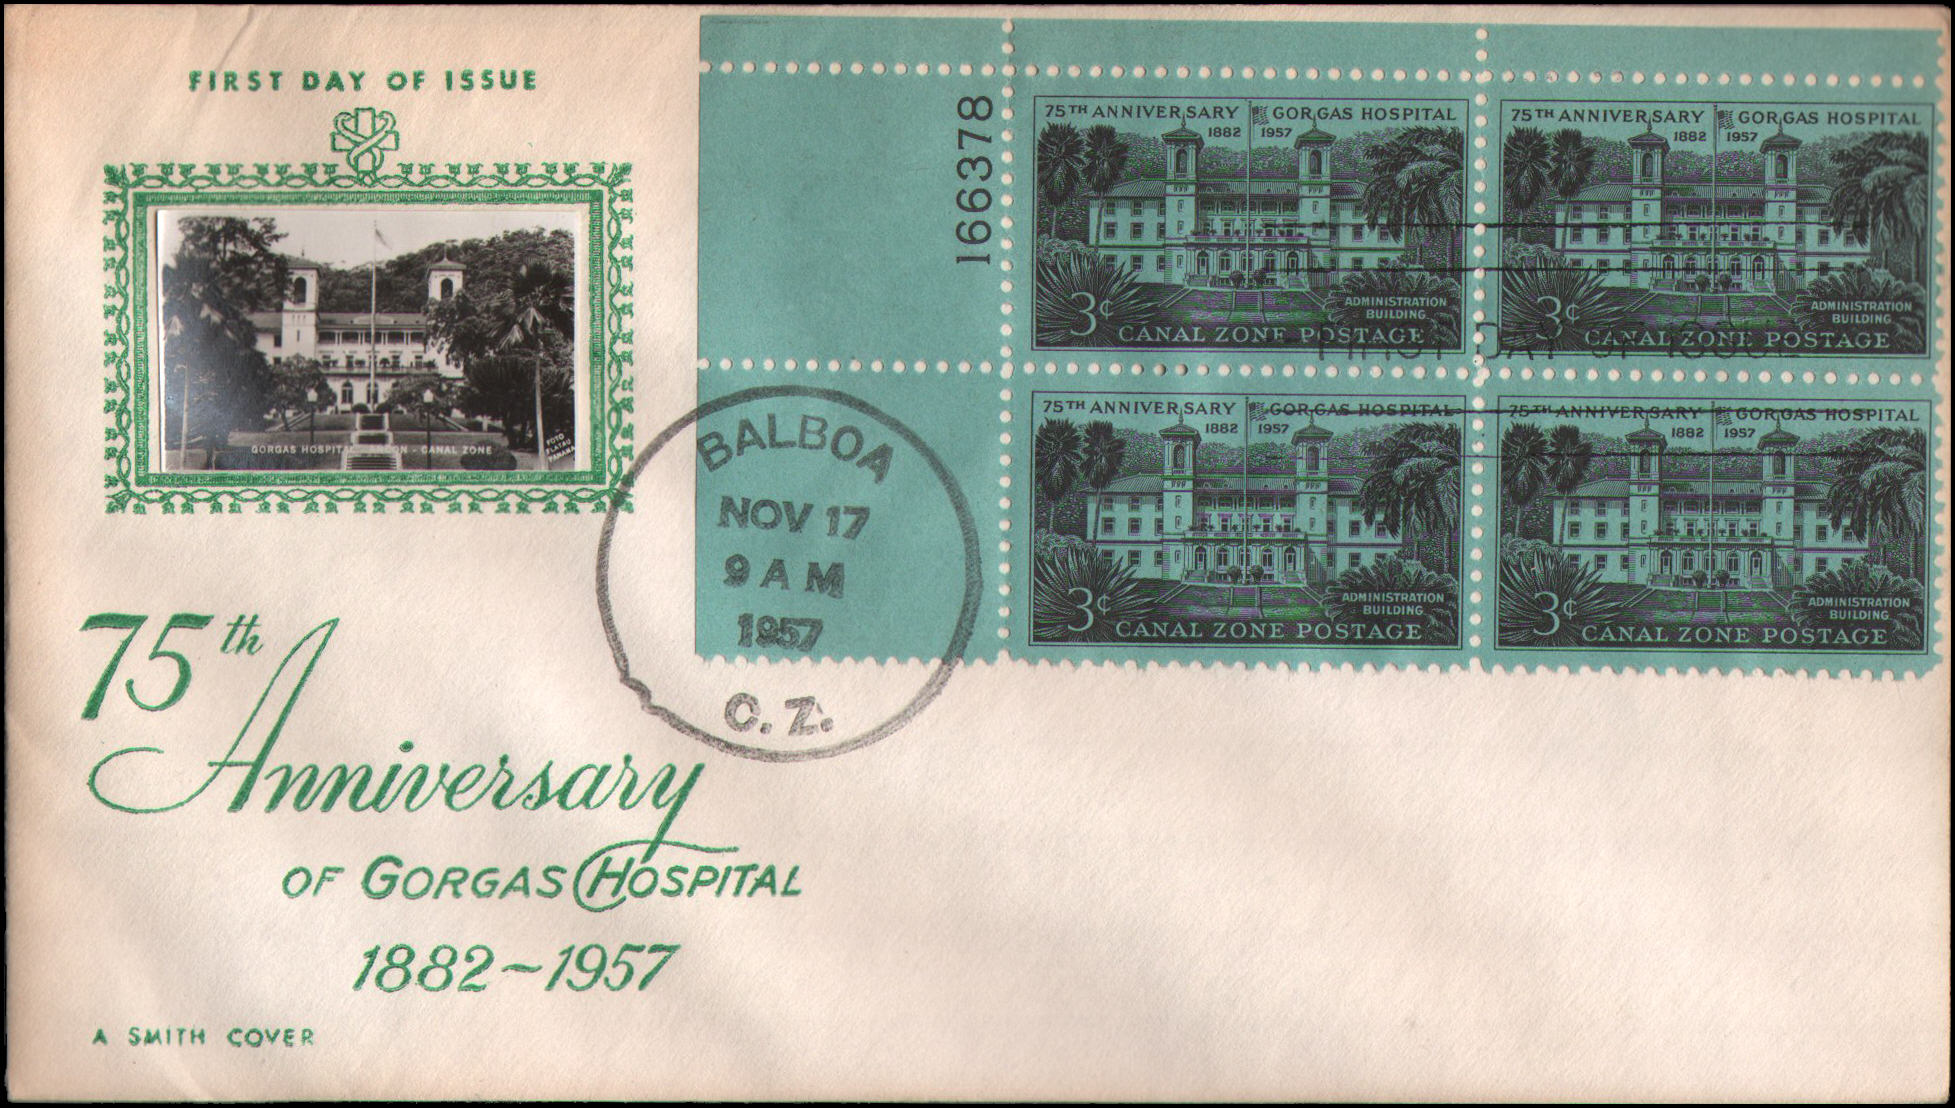 Canal Zone 148 1957 Gorgas Hospital FDC Plate Block